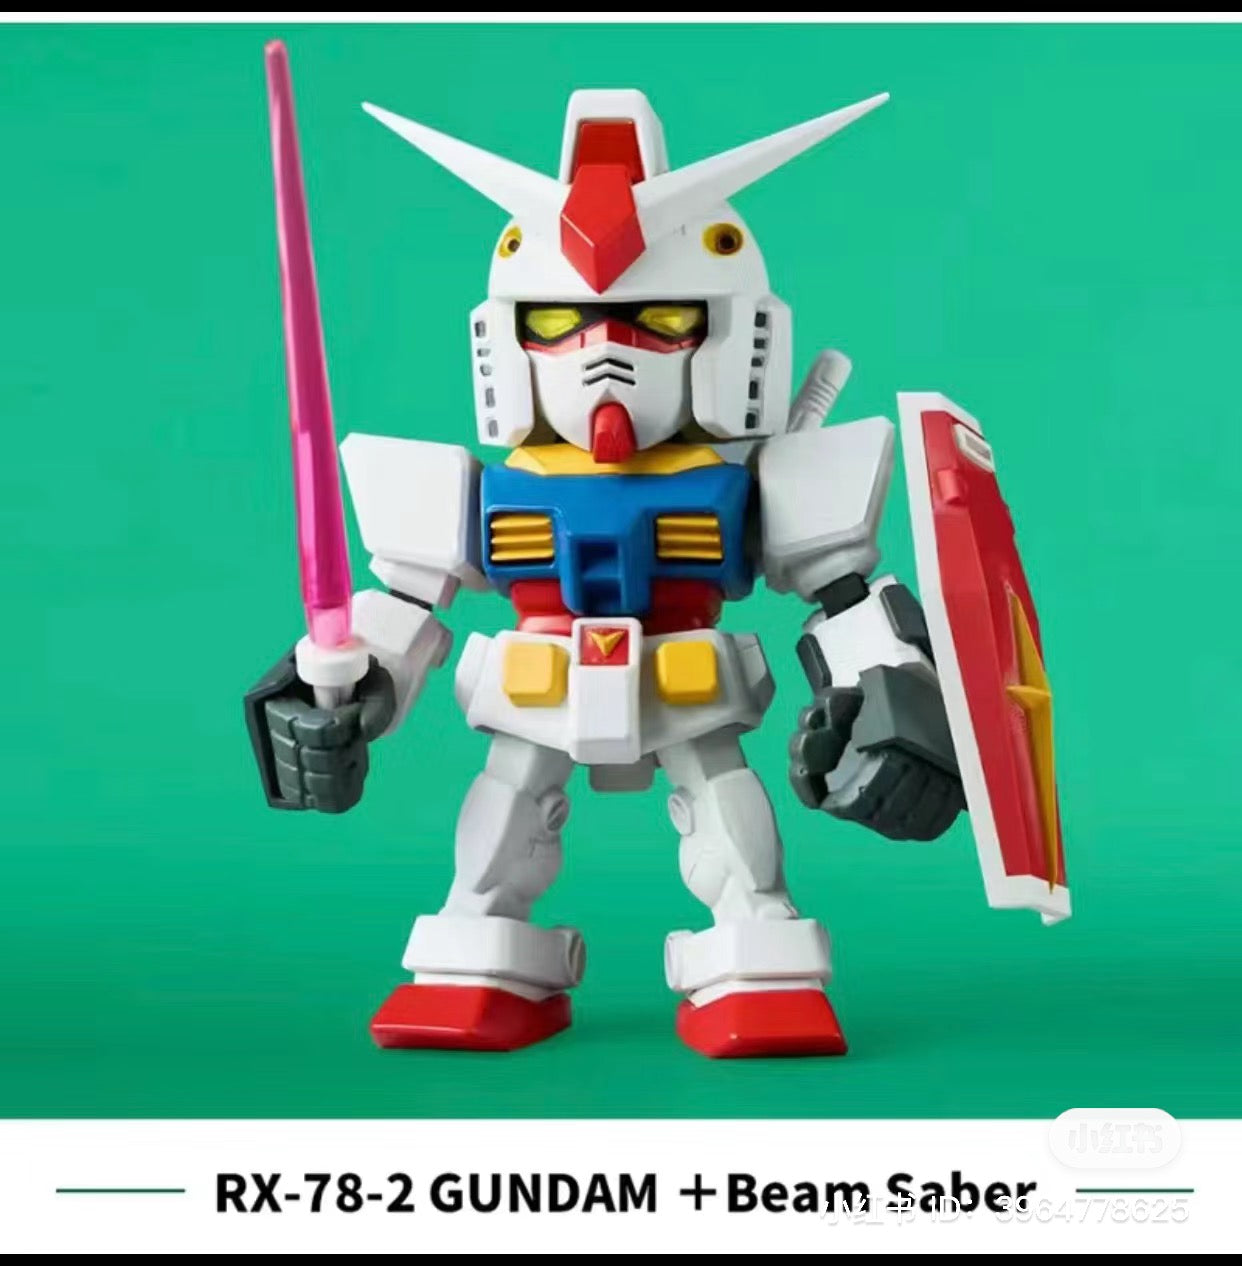 A blind box series featuring QMSV- MINI GUNDAM 2.0 robot action figures. Preorder for late June 2024. 6 regular designs and 2 secrets available. Purchase a case for 8 regular or 7 regular and 1 secret.